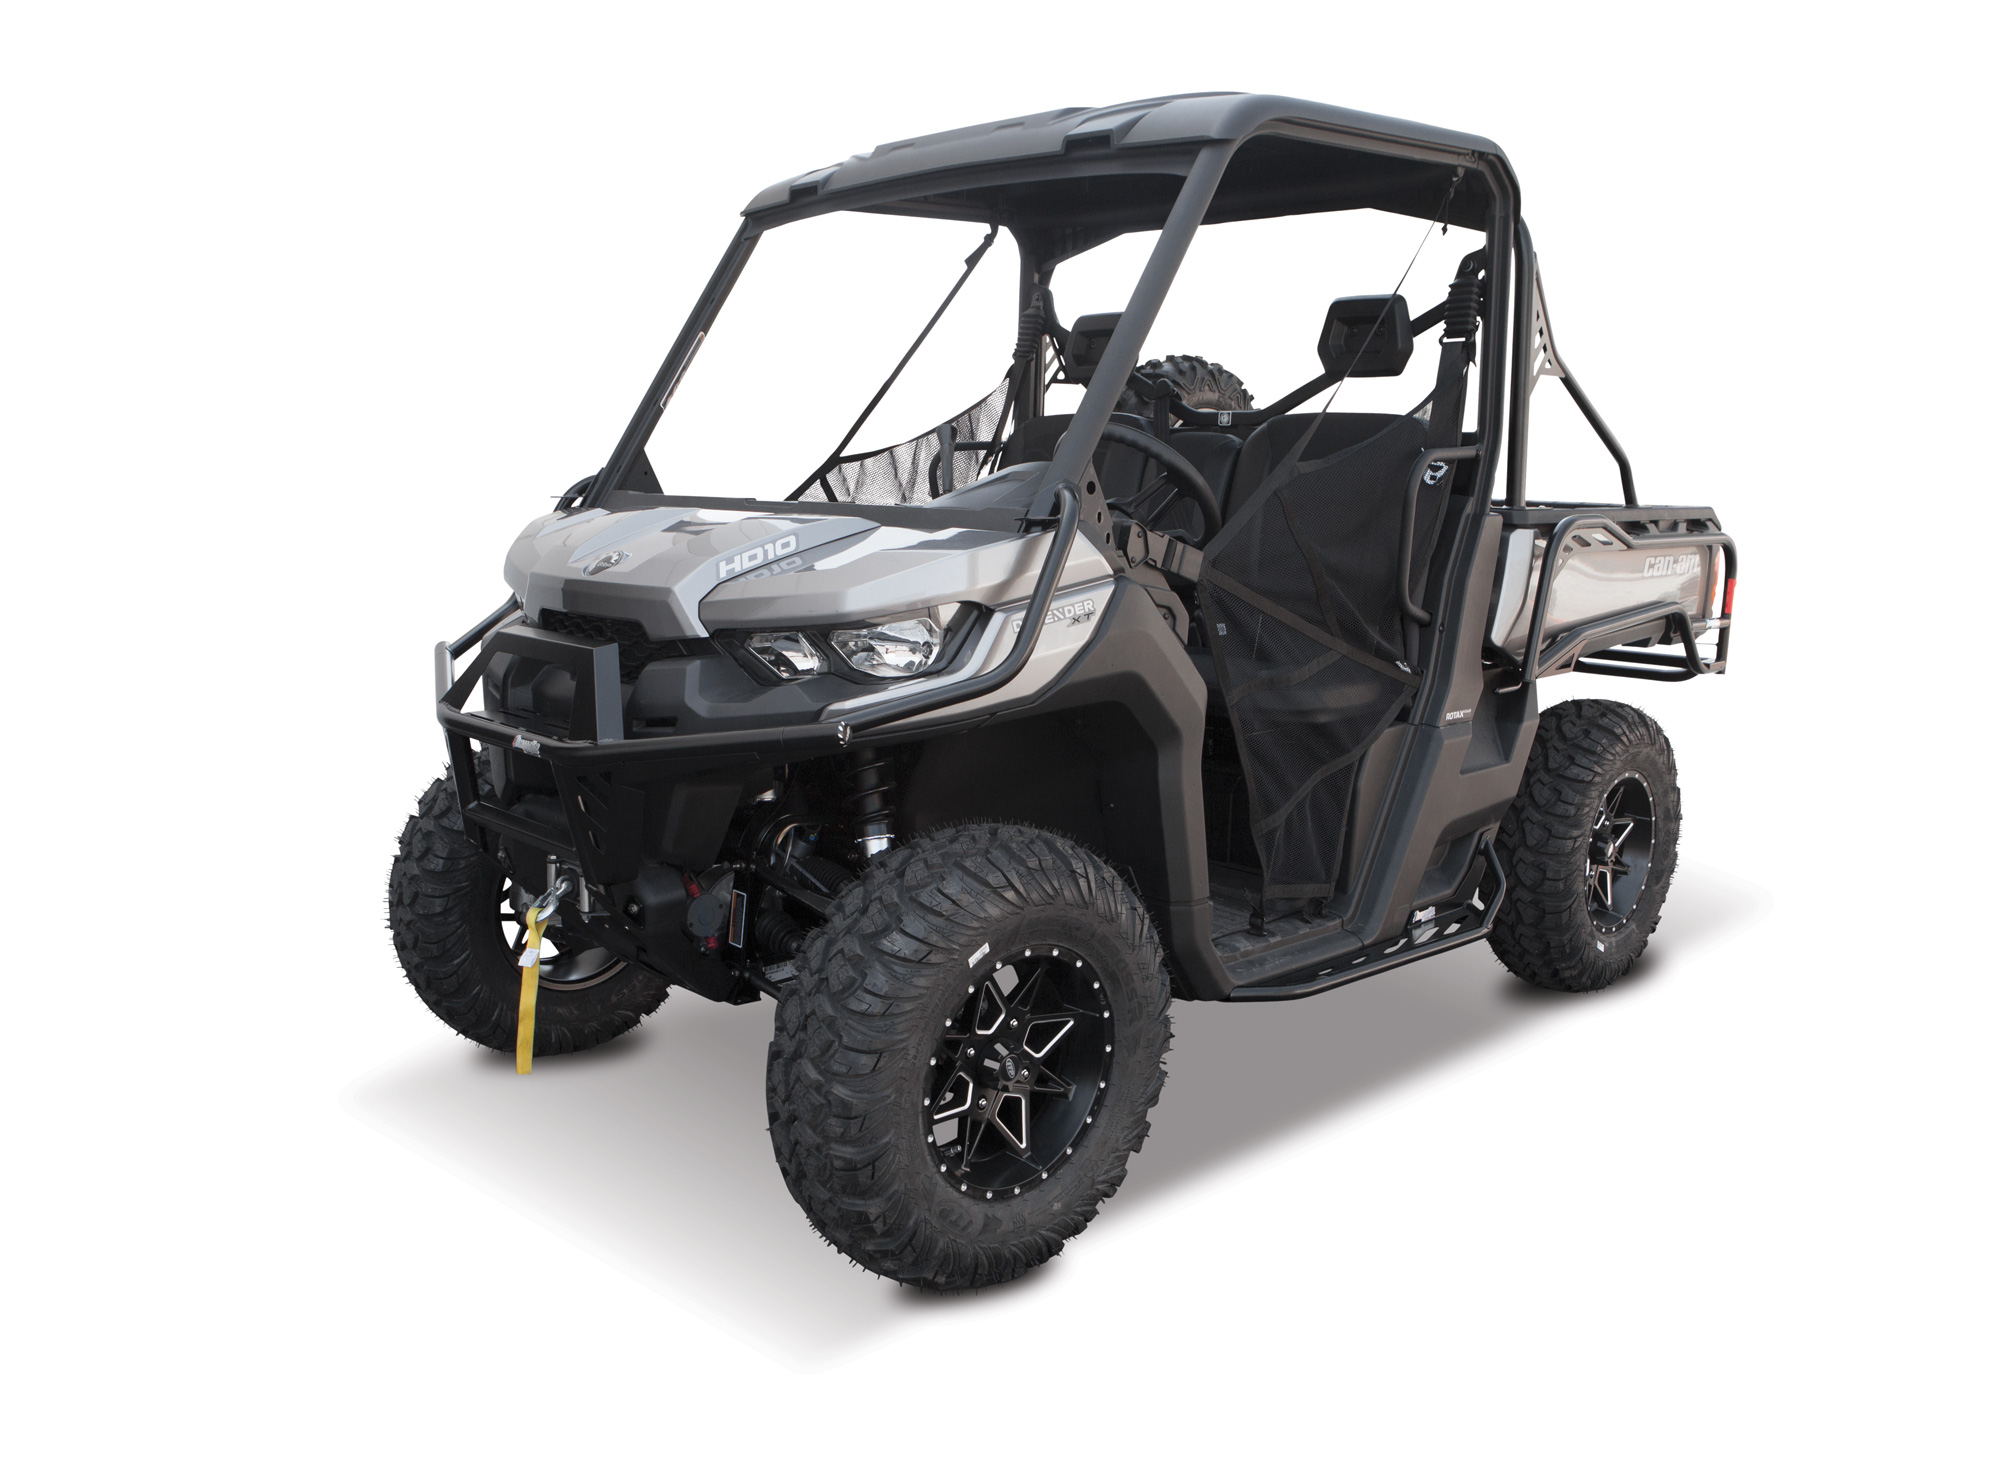 DragonFire Introduces New Lift Kit for Can-Am Defender - UTV Guide